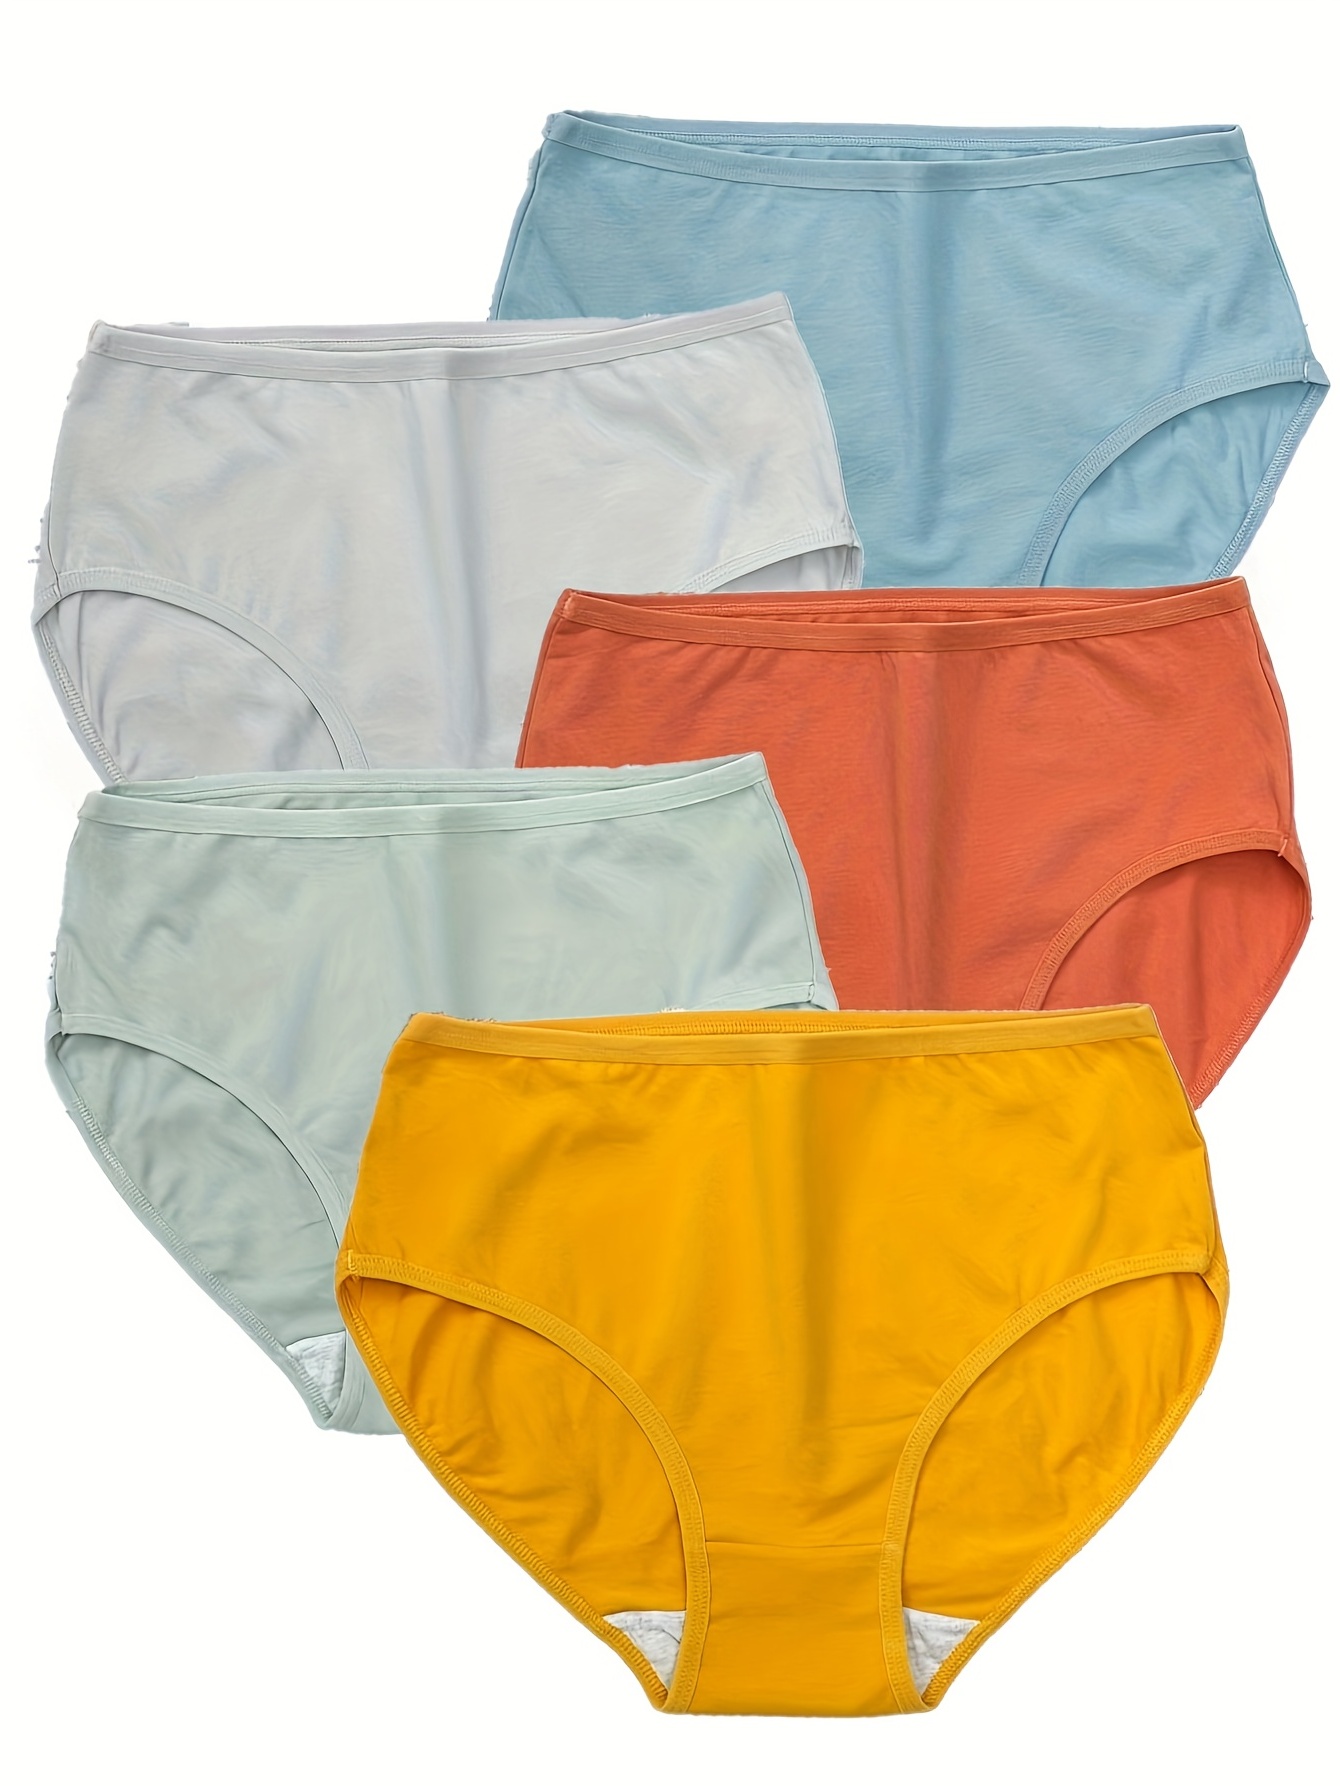 everdries reviews  Everdries Leakproof Underwear, Everdries Panties,  Everdries Leakproof Ladies Ice Silk High Waisted Panties